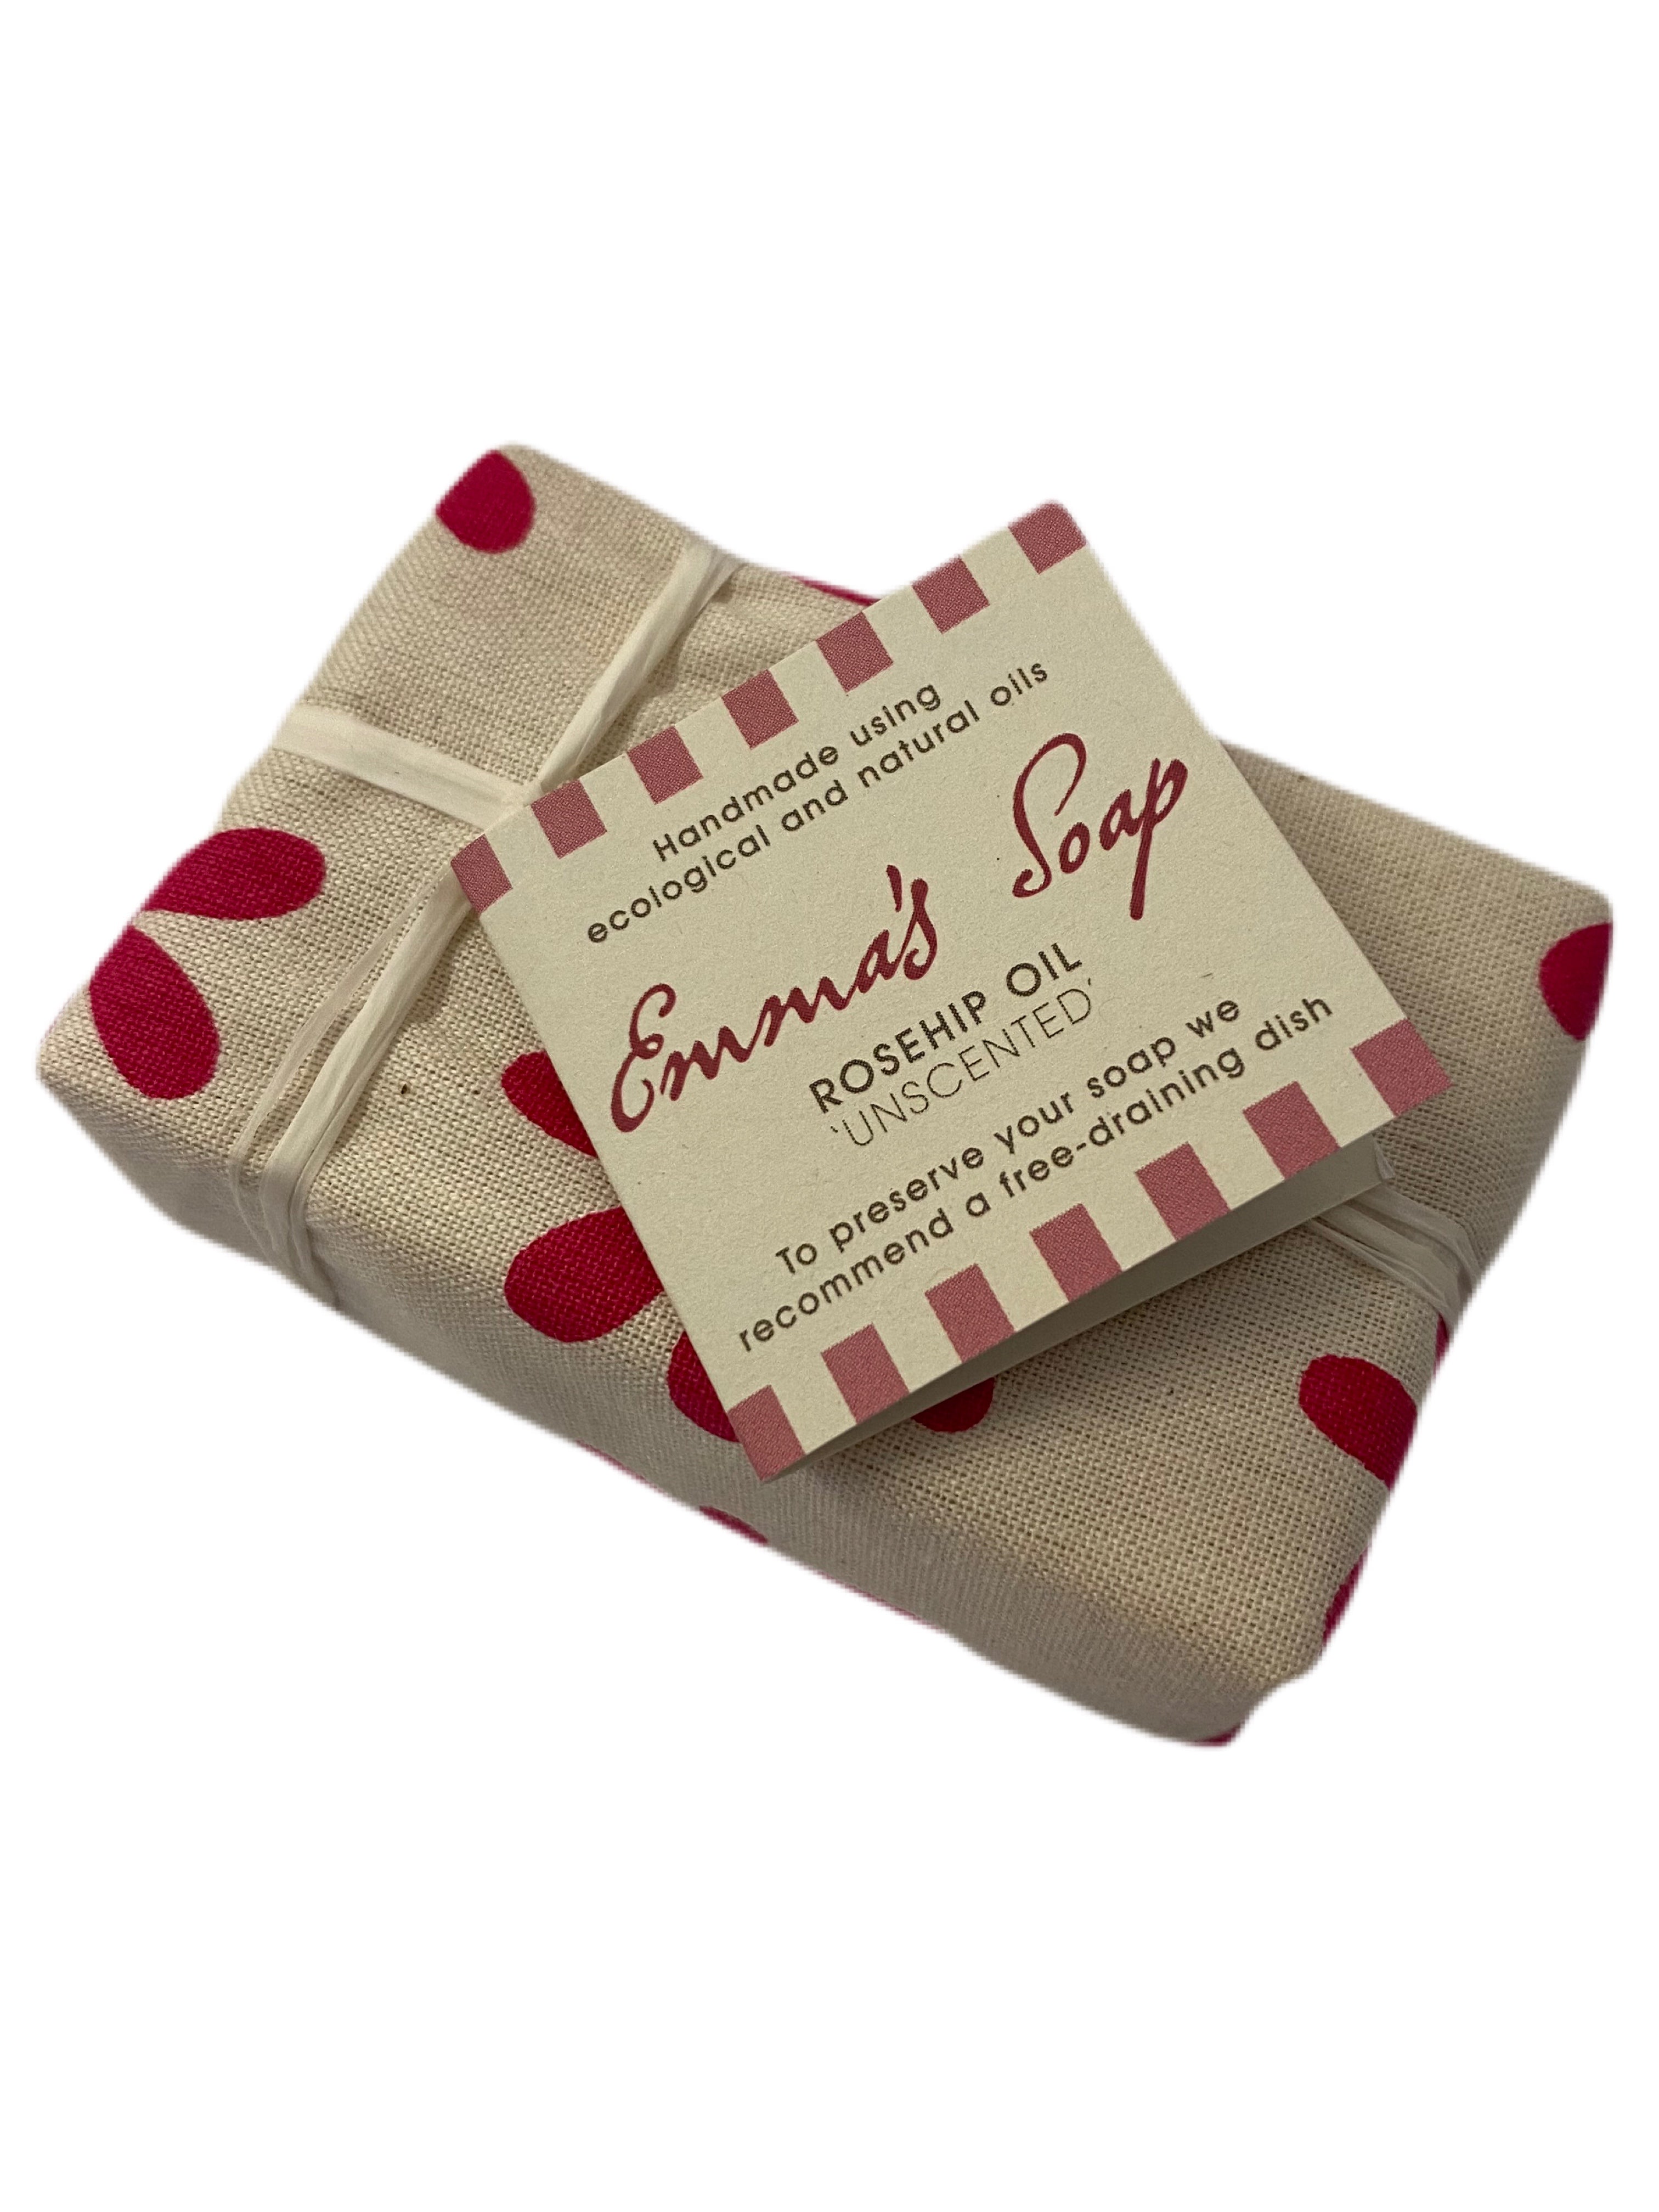 Emma's Soap - Rosehip Oil Unscented Soap Bar - Kate's Cupboard